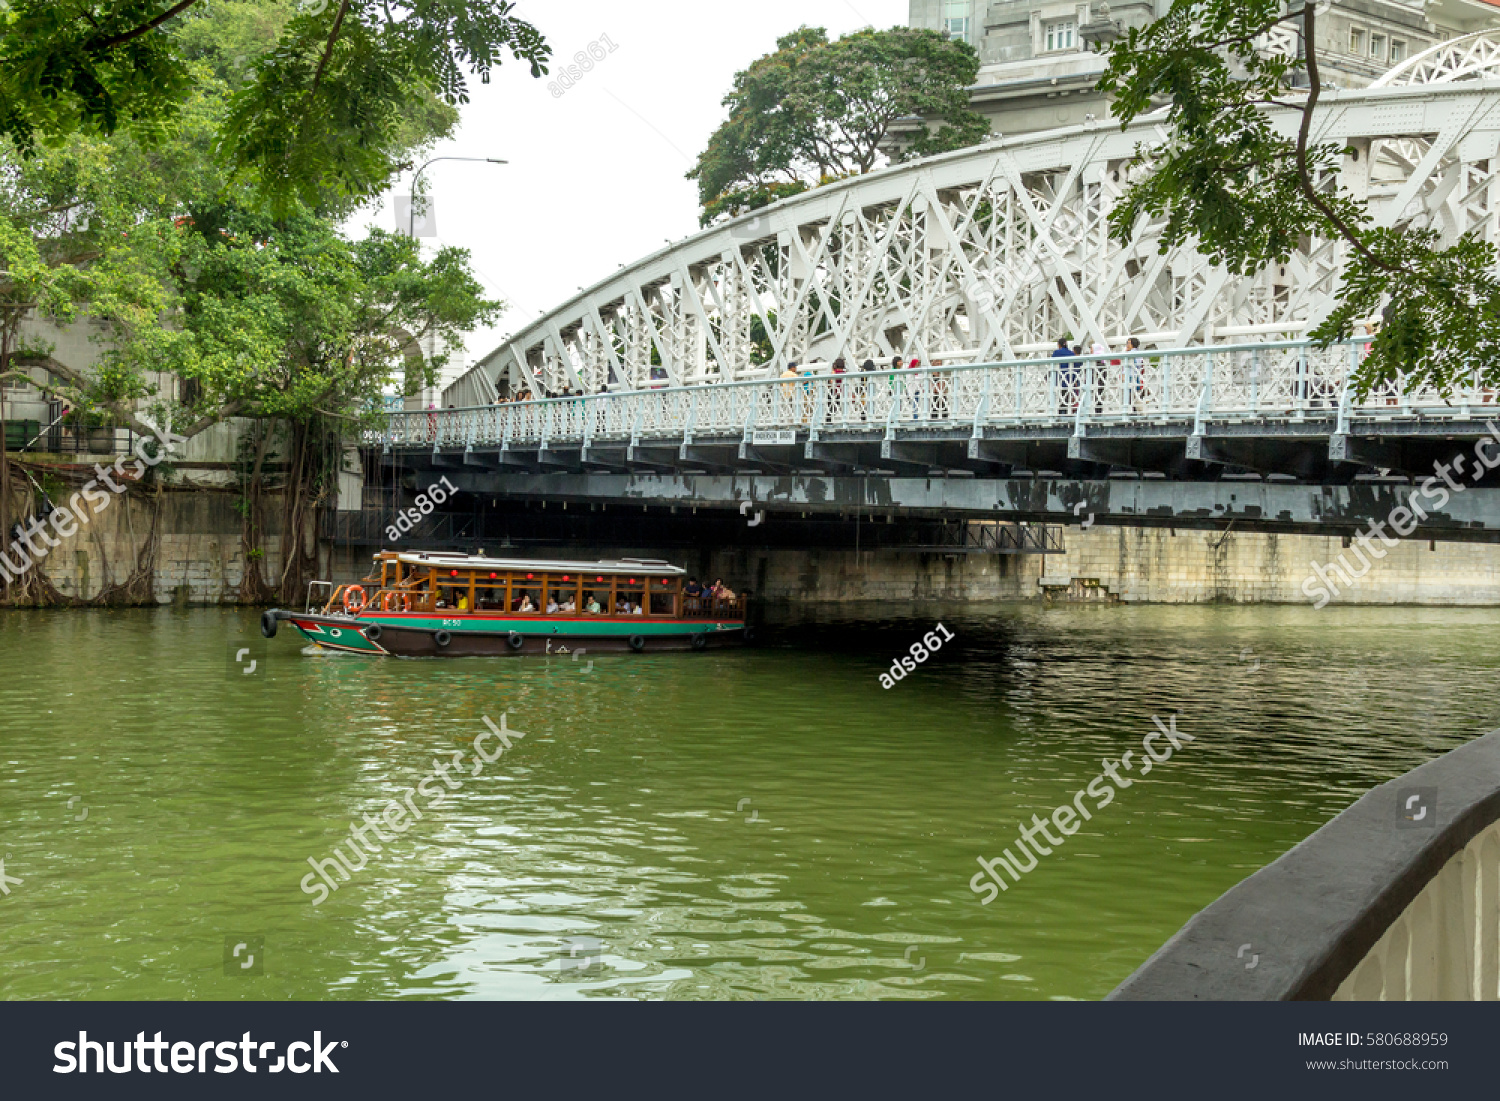 One of the bridges over the Singapore River Architectural monuments and places of interest in Singapore #580688959